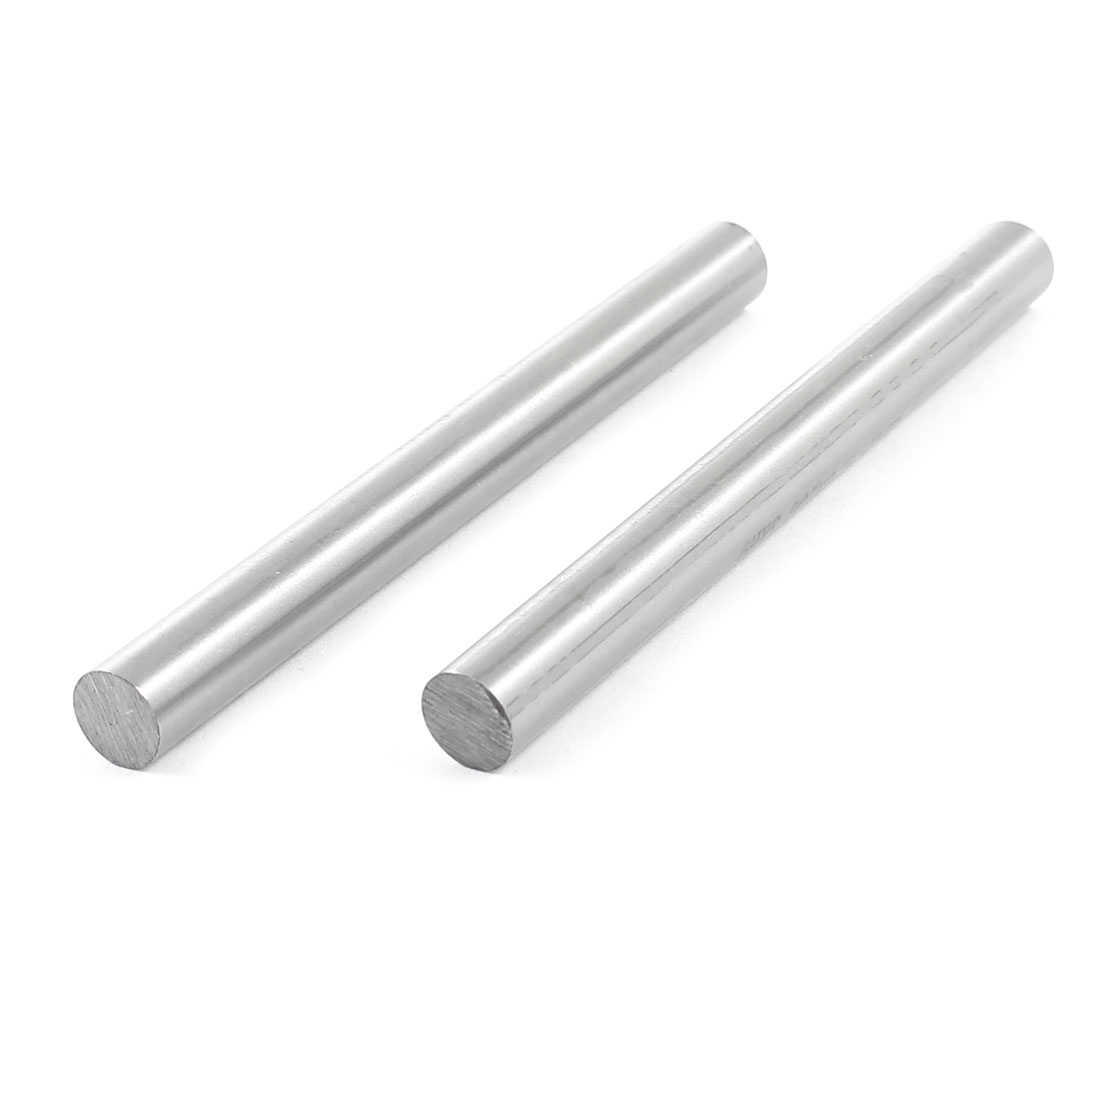 Unique Bargains 2 Pcs 9mm x 100mm HSS Grooving Tool Round Turning Lathe Bars Silver Gray